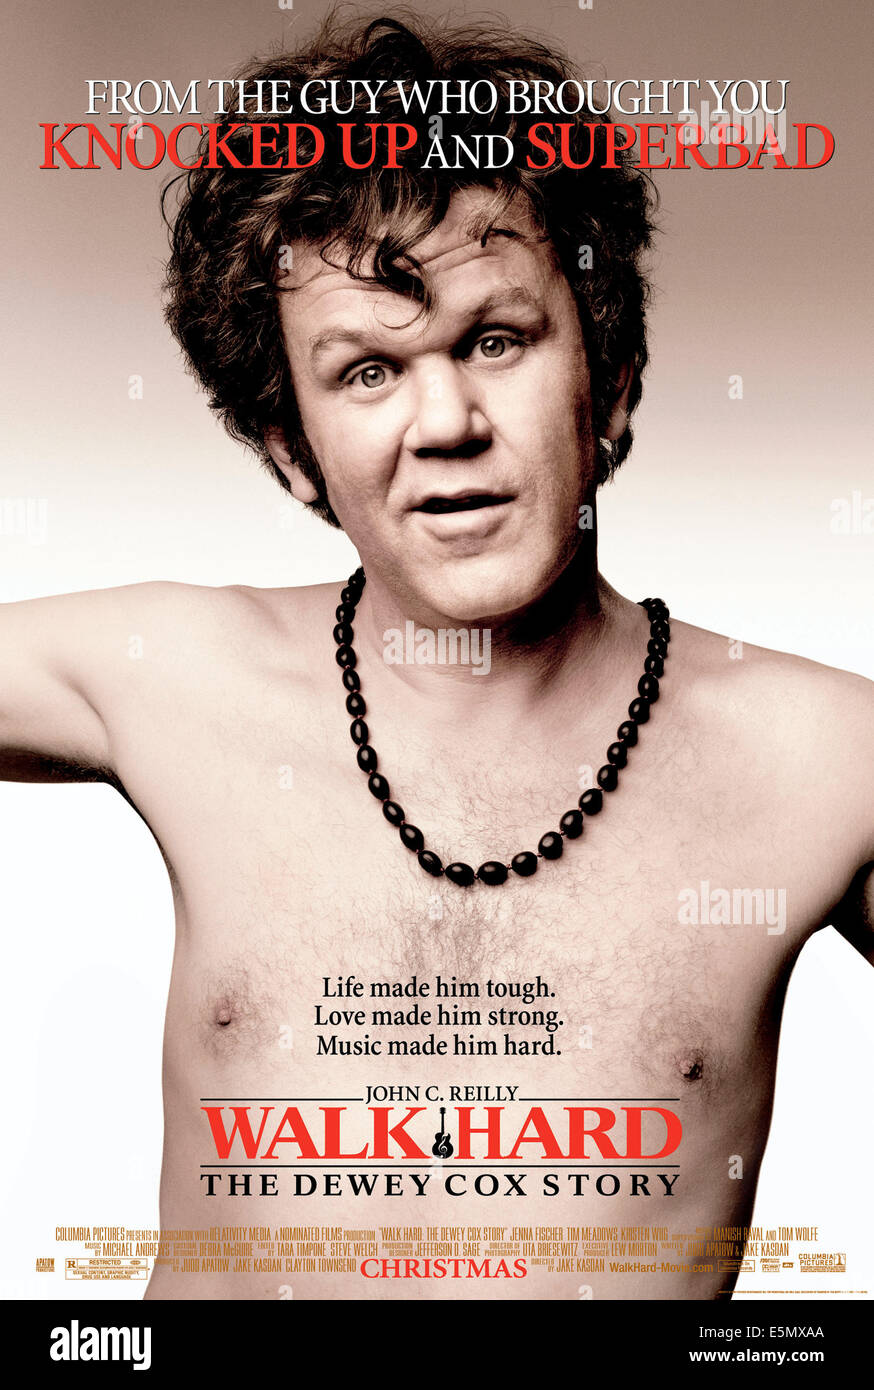 WALK HARD: THE DEWEY COX STORY, John C. Reilly, 2007. ©Columbia Pictures/courtesy Everett Collection Stock Photo